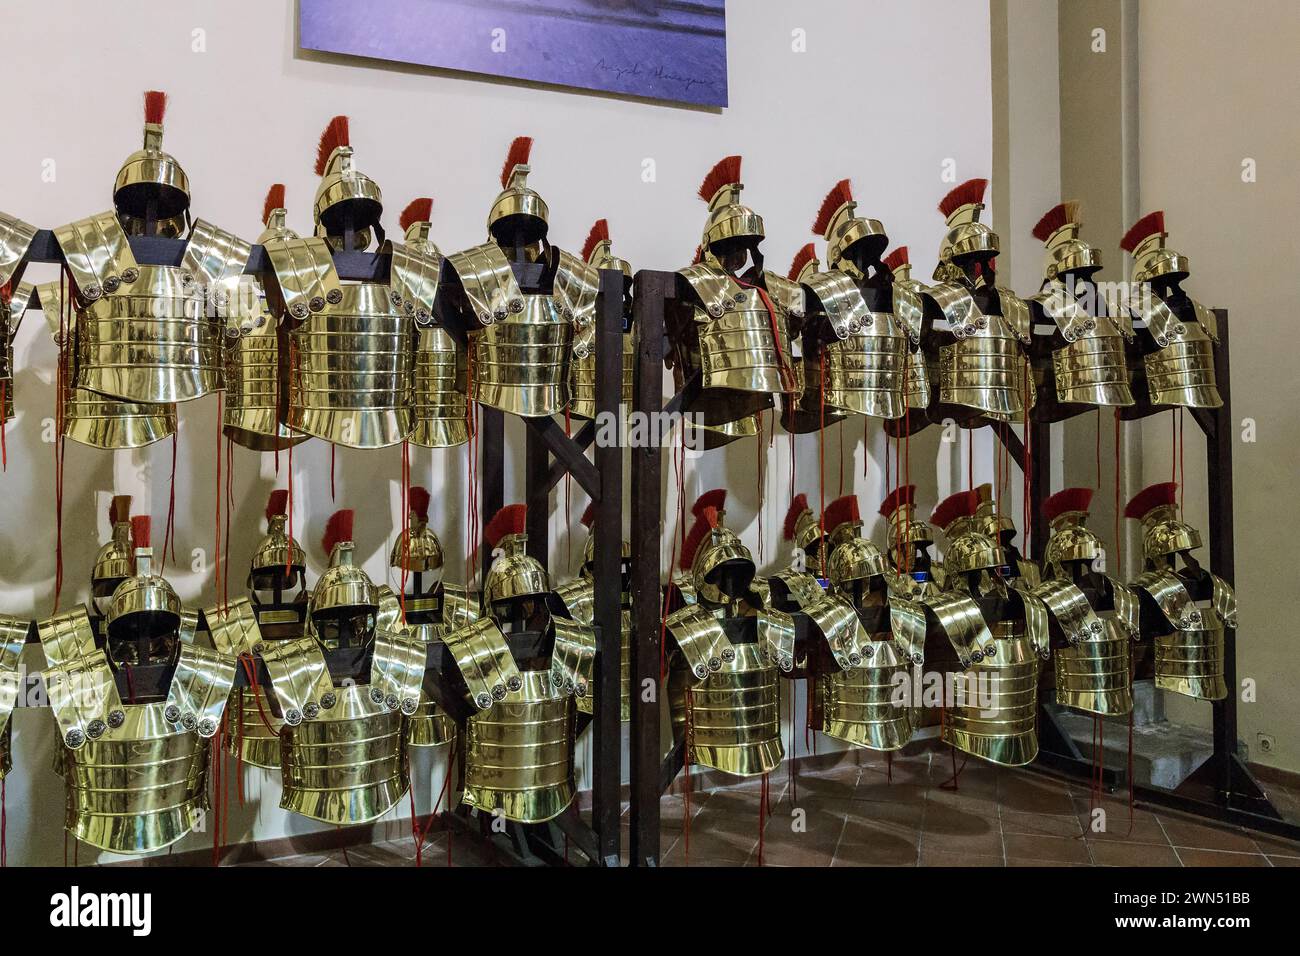 GIRONA, SPAIN - MAY 14, 2017: This is the armor of Roman legionnaires at the exhibition of carnival paraphernalia in the Church of St. Luke. ​ Stock Photo